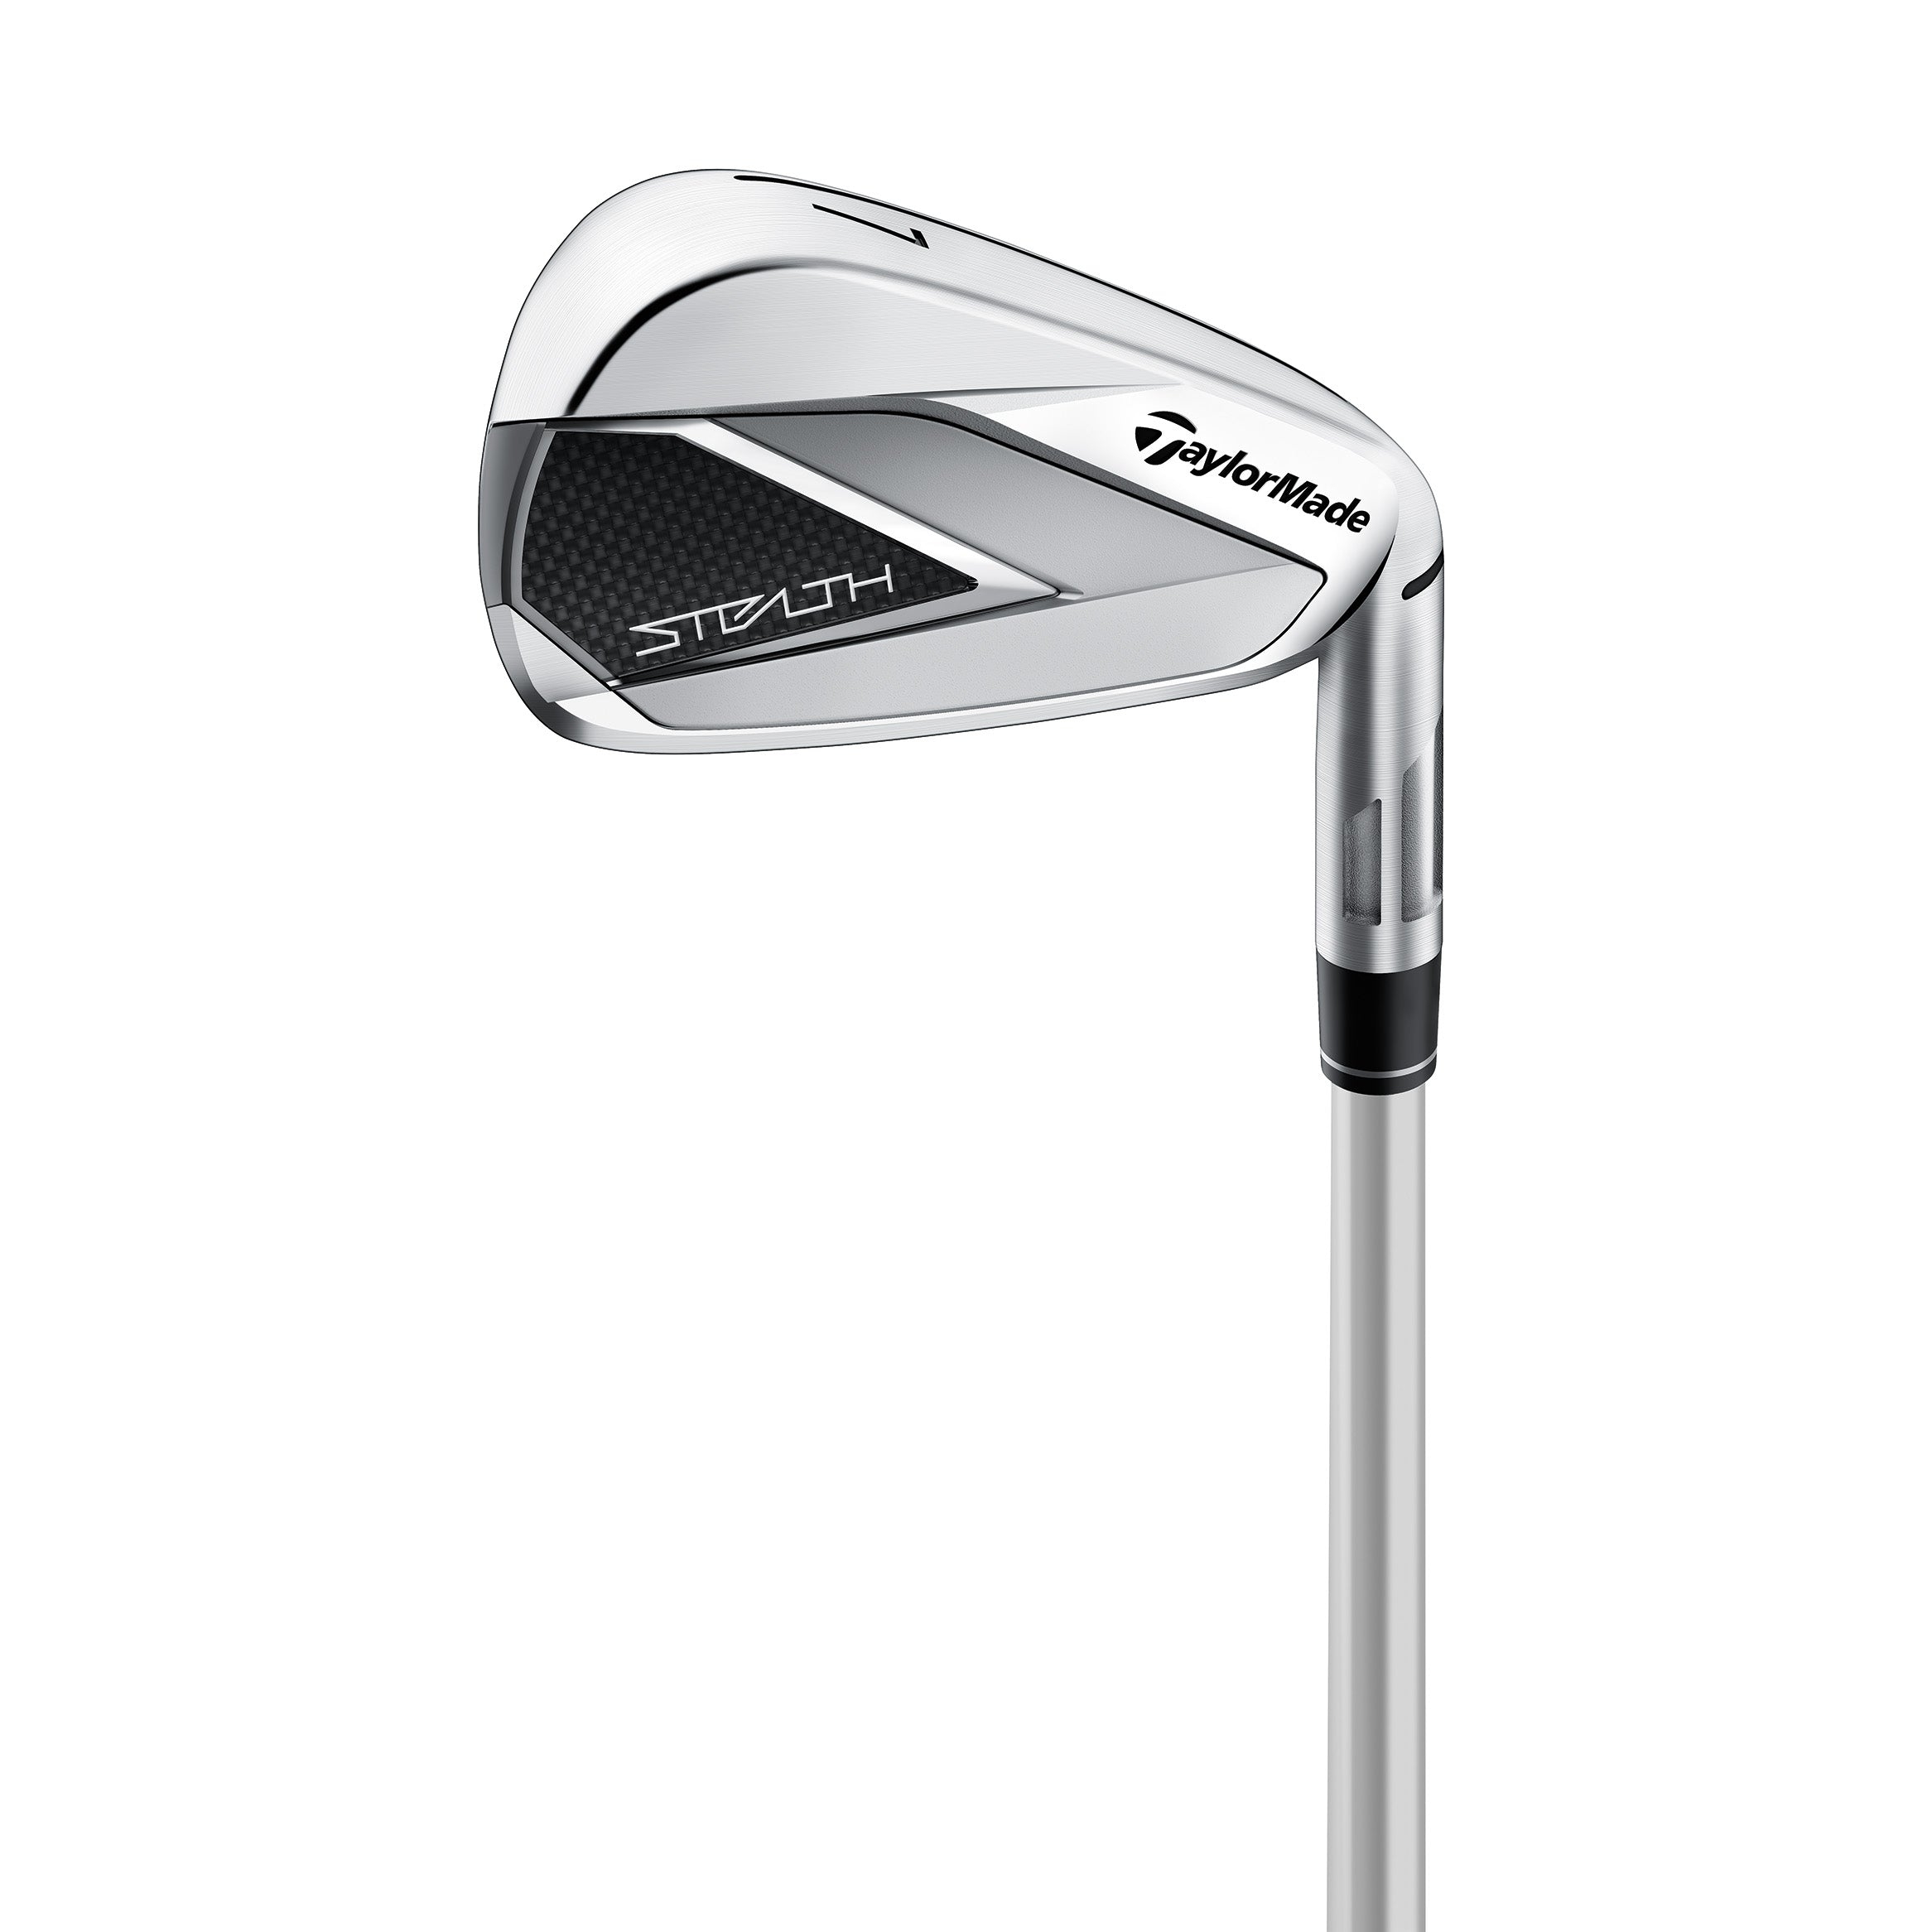 Stealth TaylorMade Irons